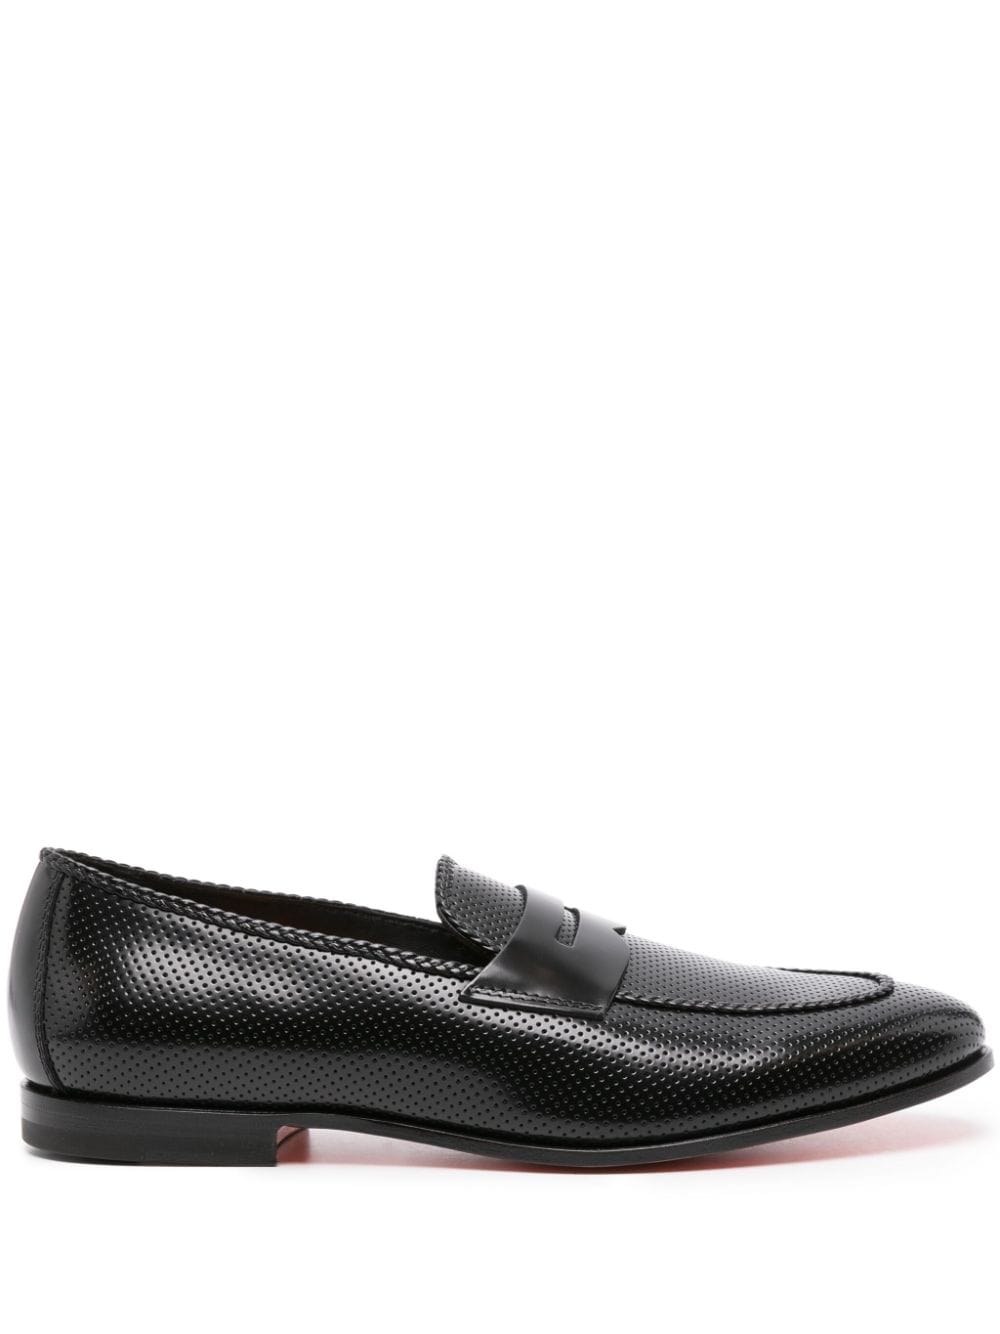 Santoni perforated leather penny loafers Black